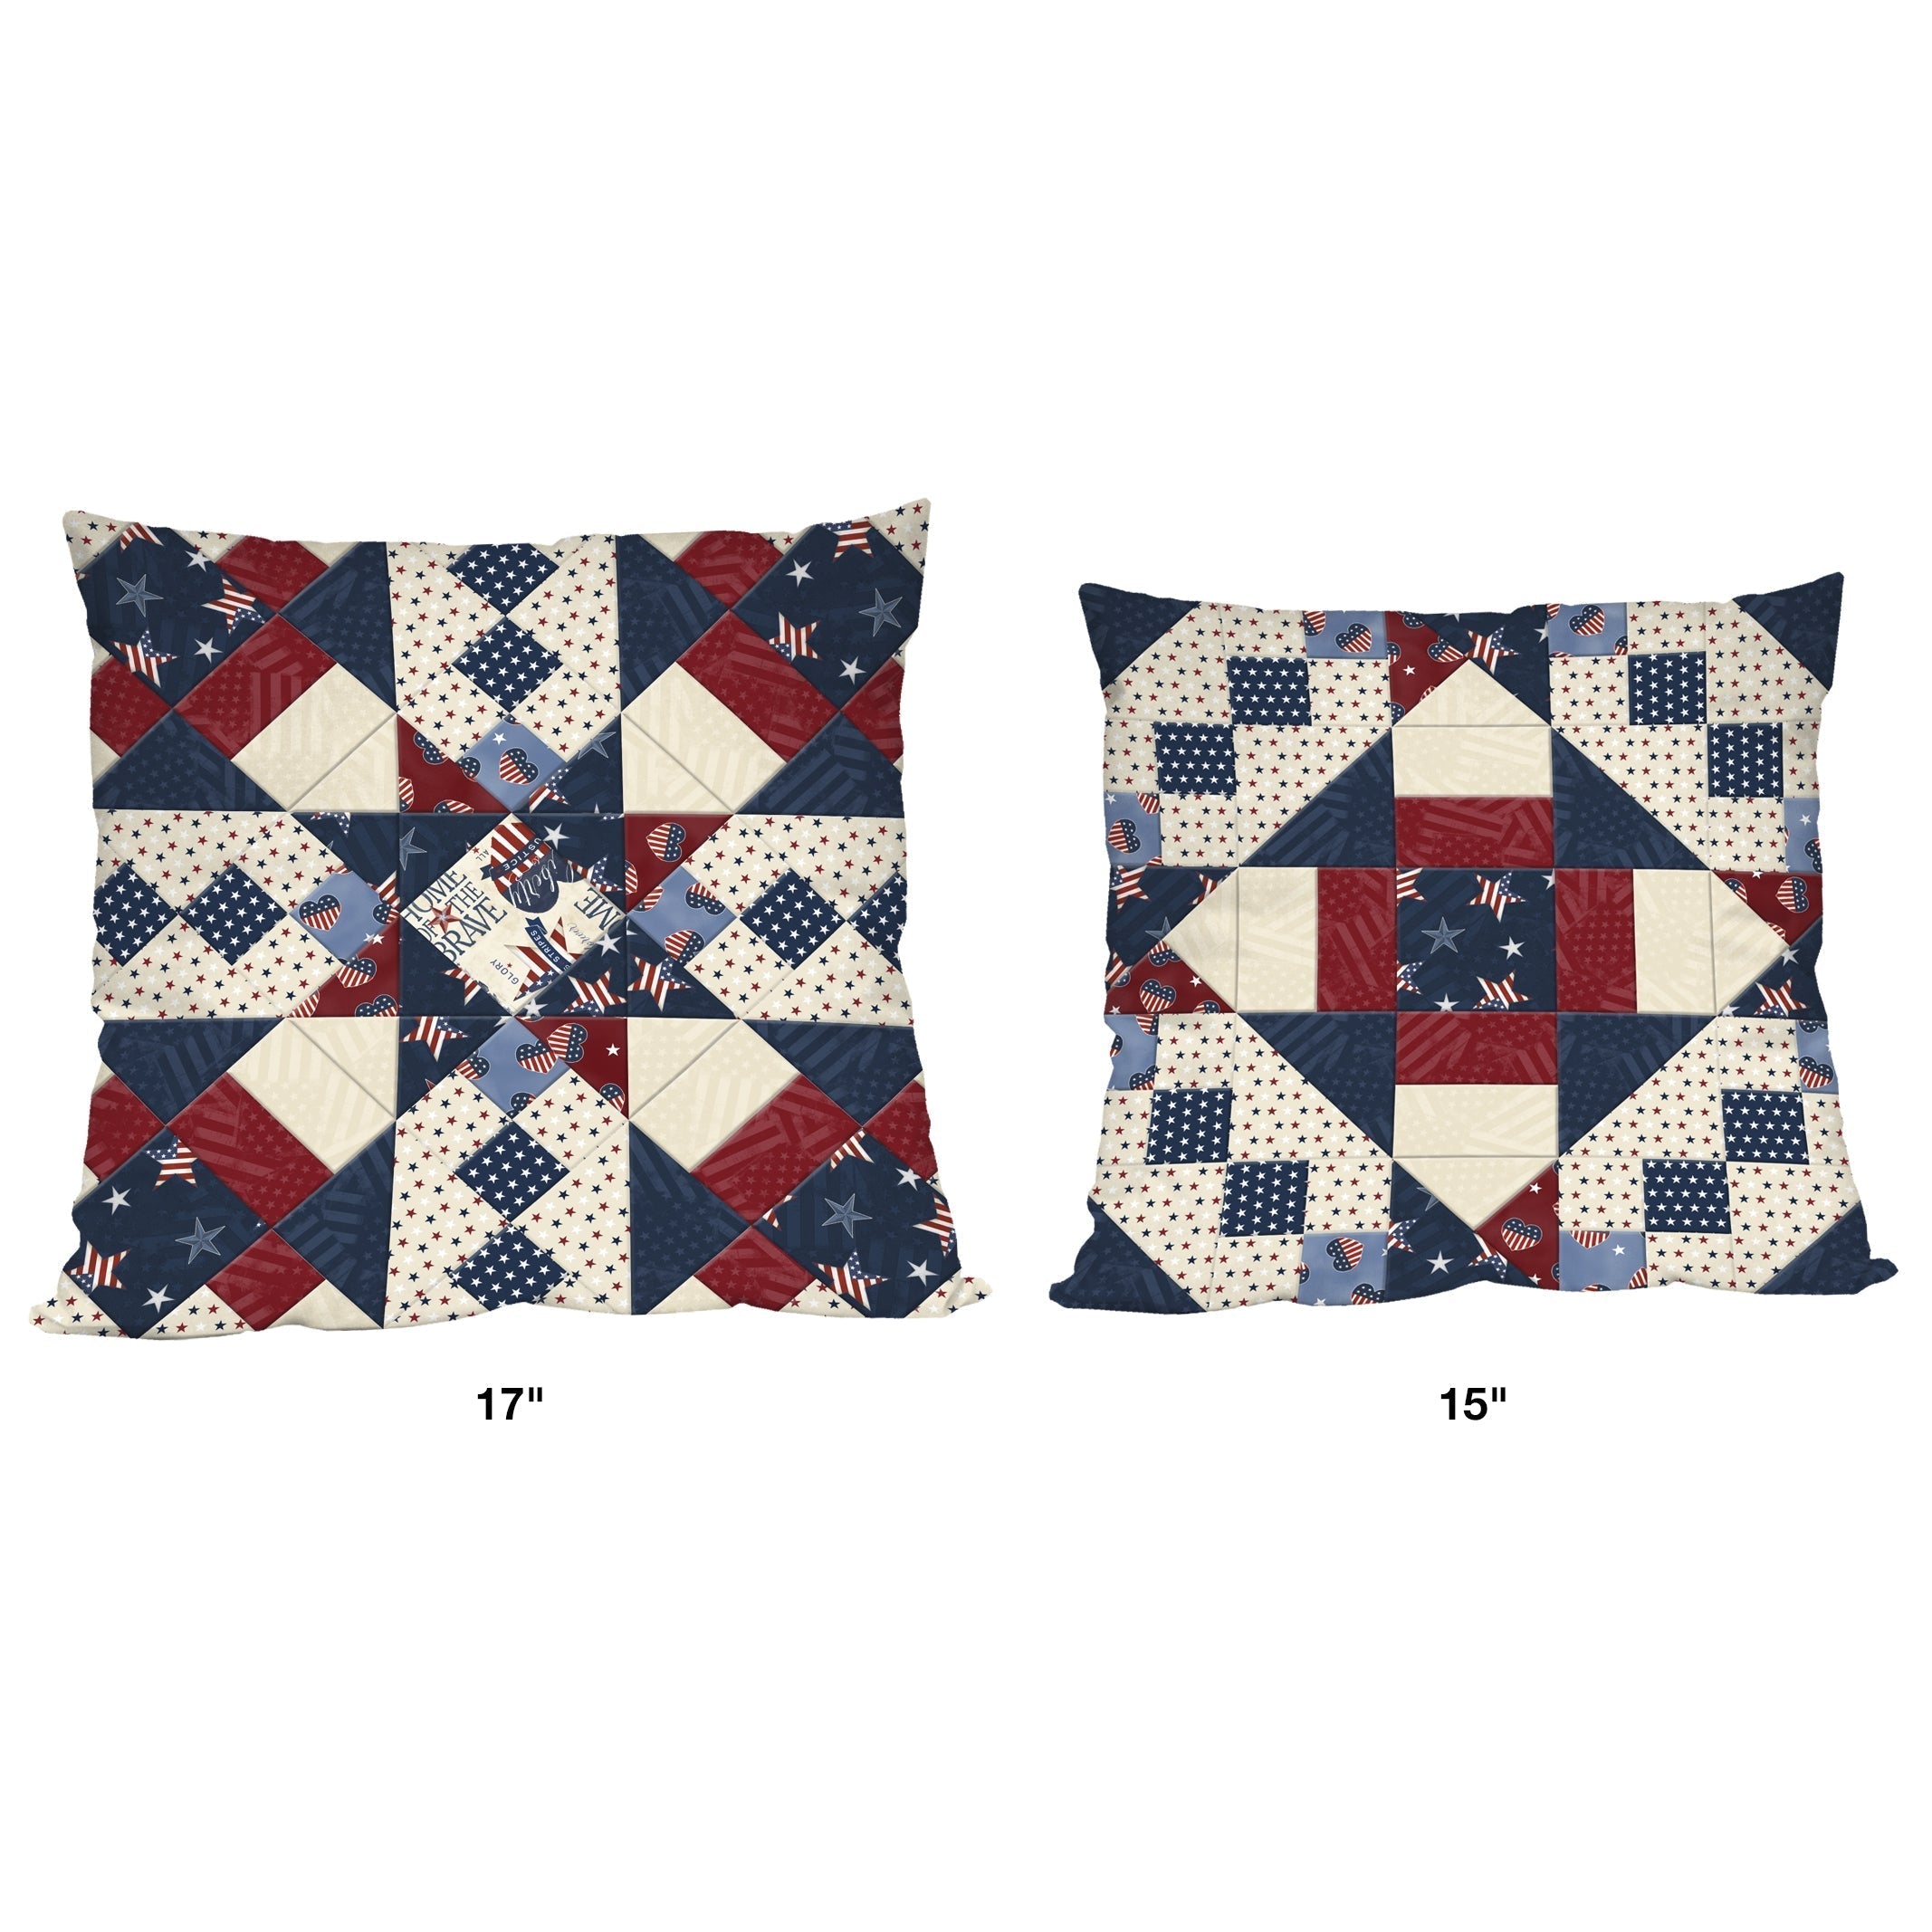 Basic Patchwork Pillows - Free Digital Download-Wilmington Prints-My Favorite Quilt Store